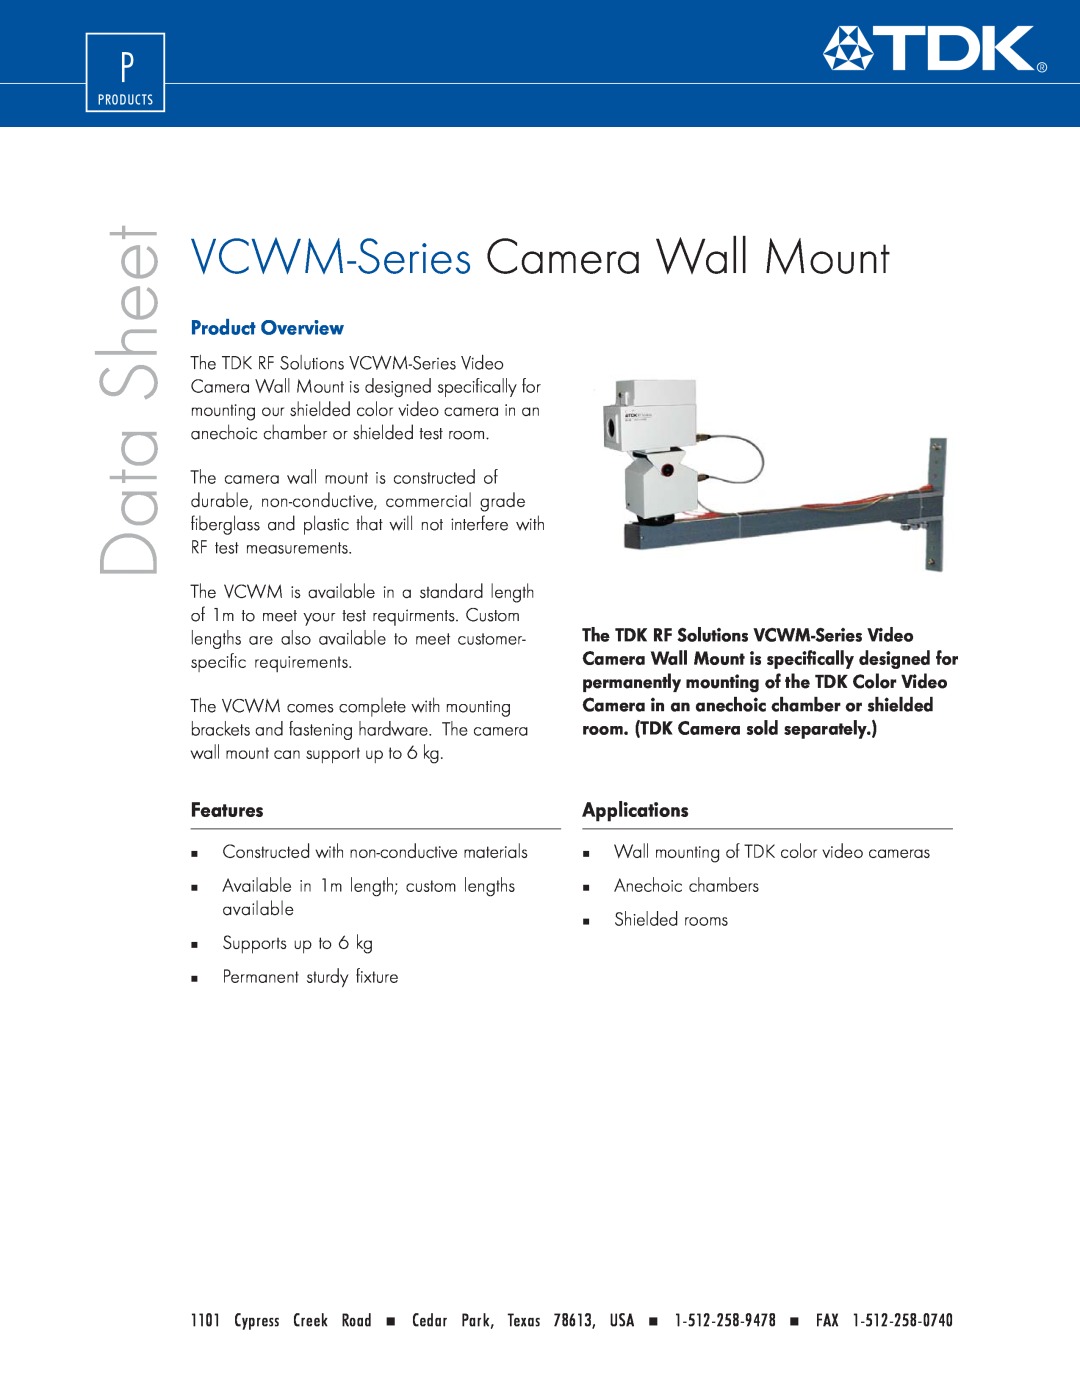 TDK VCWM-150, VCWM Series manual VCWM-Series Camera Wall Mount, Features, Applications, Data, Sheet, Product Overview 